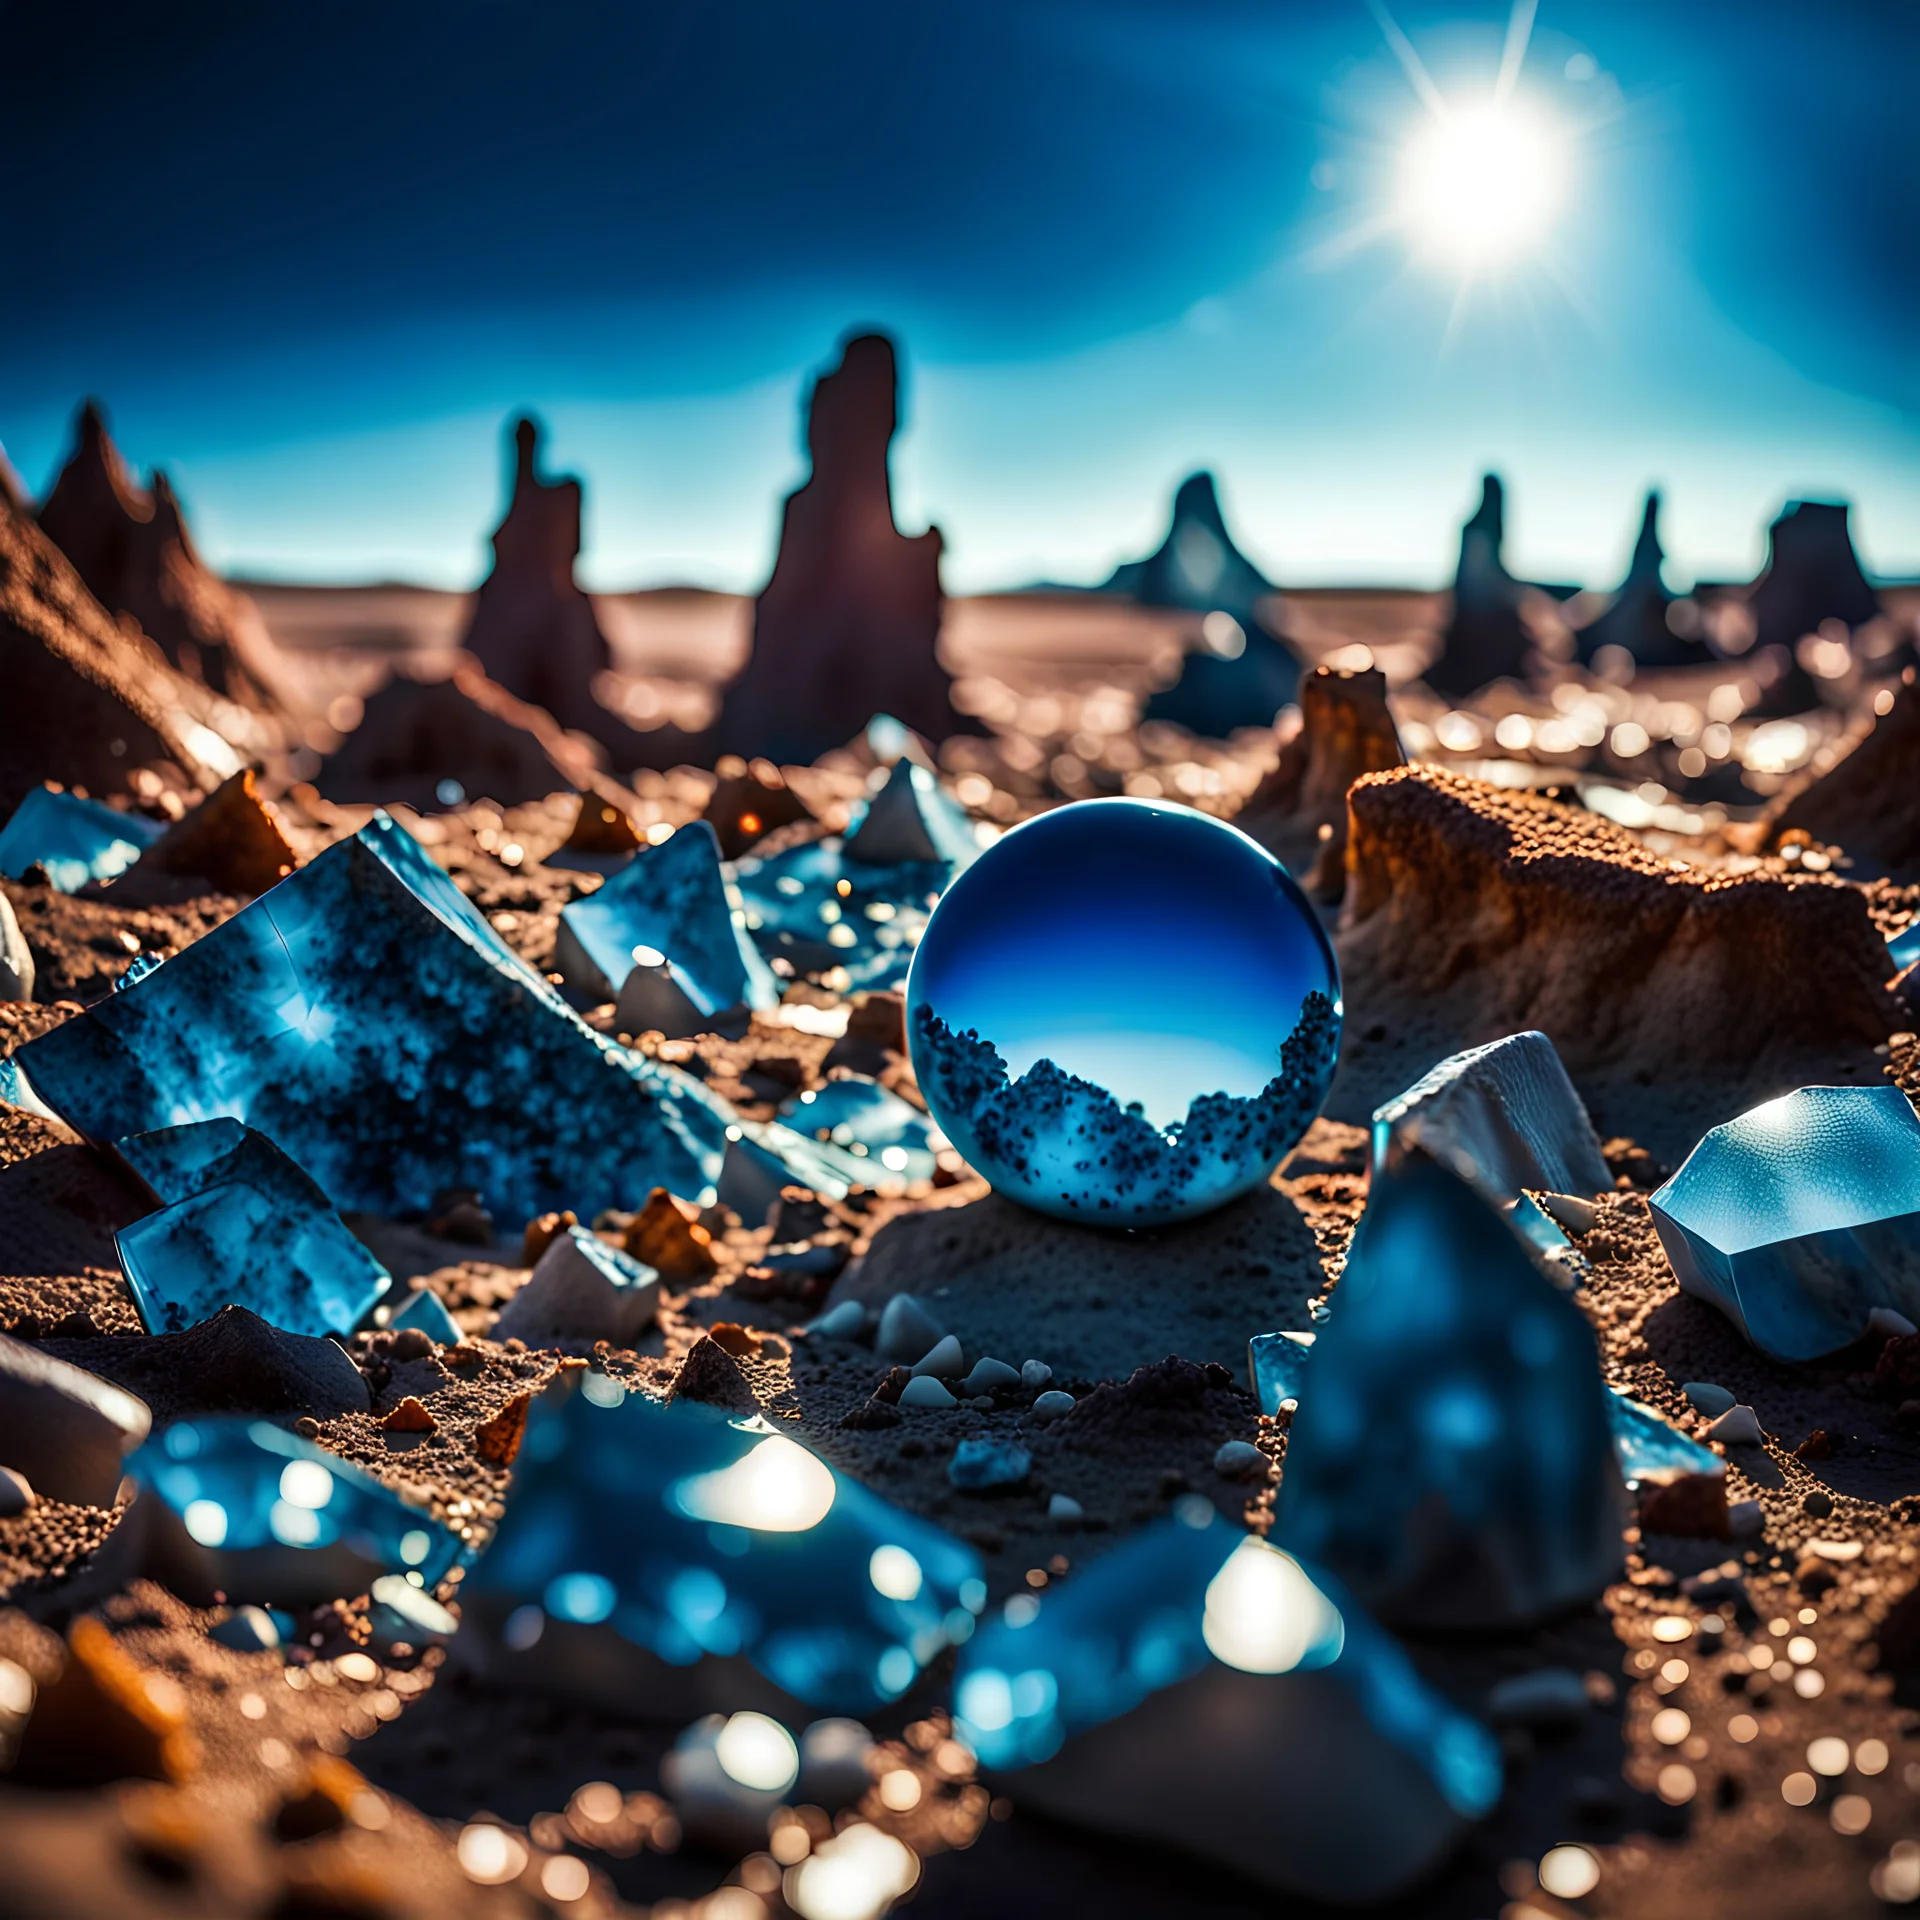 A striking photograh close-up captures a surreal wasteland with group of metaphysical shapes, adorned with minerals and rocks. Bathed in intense light, eerie, giant blue sun, 8k, deep 3d field, nothingness, strong texture, extreme paranoia, hypnotic, Yves Tanguy, colours, rich moody colors, bokeh, 33mm photography